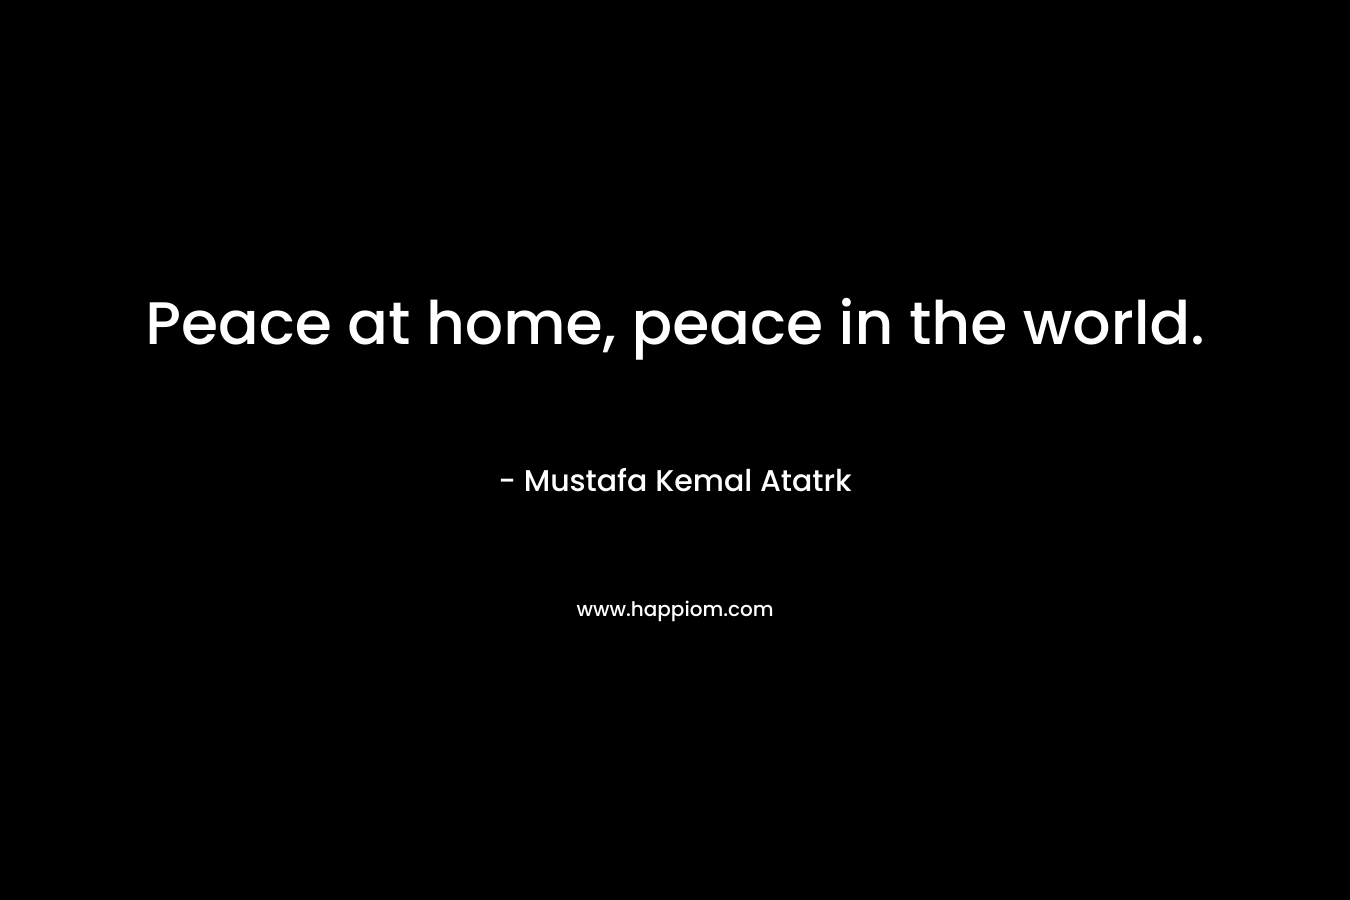 Peace at home, peace in the world.